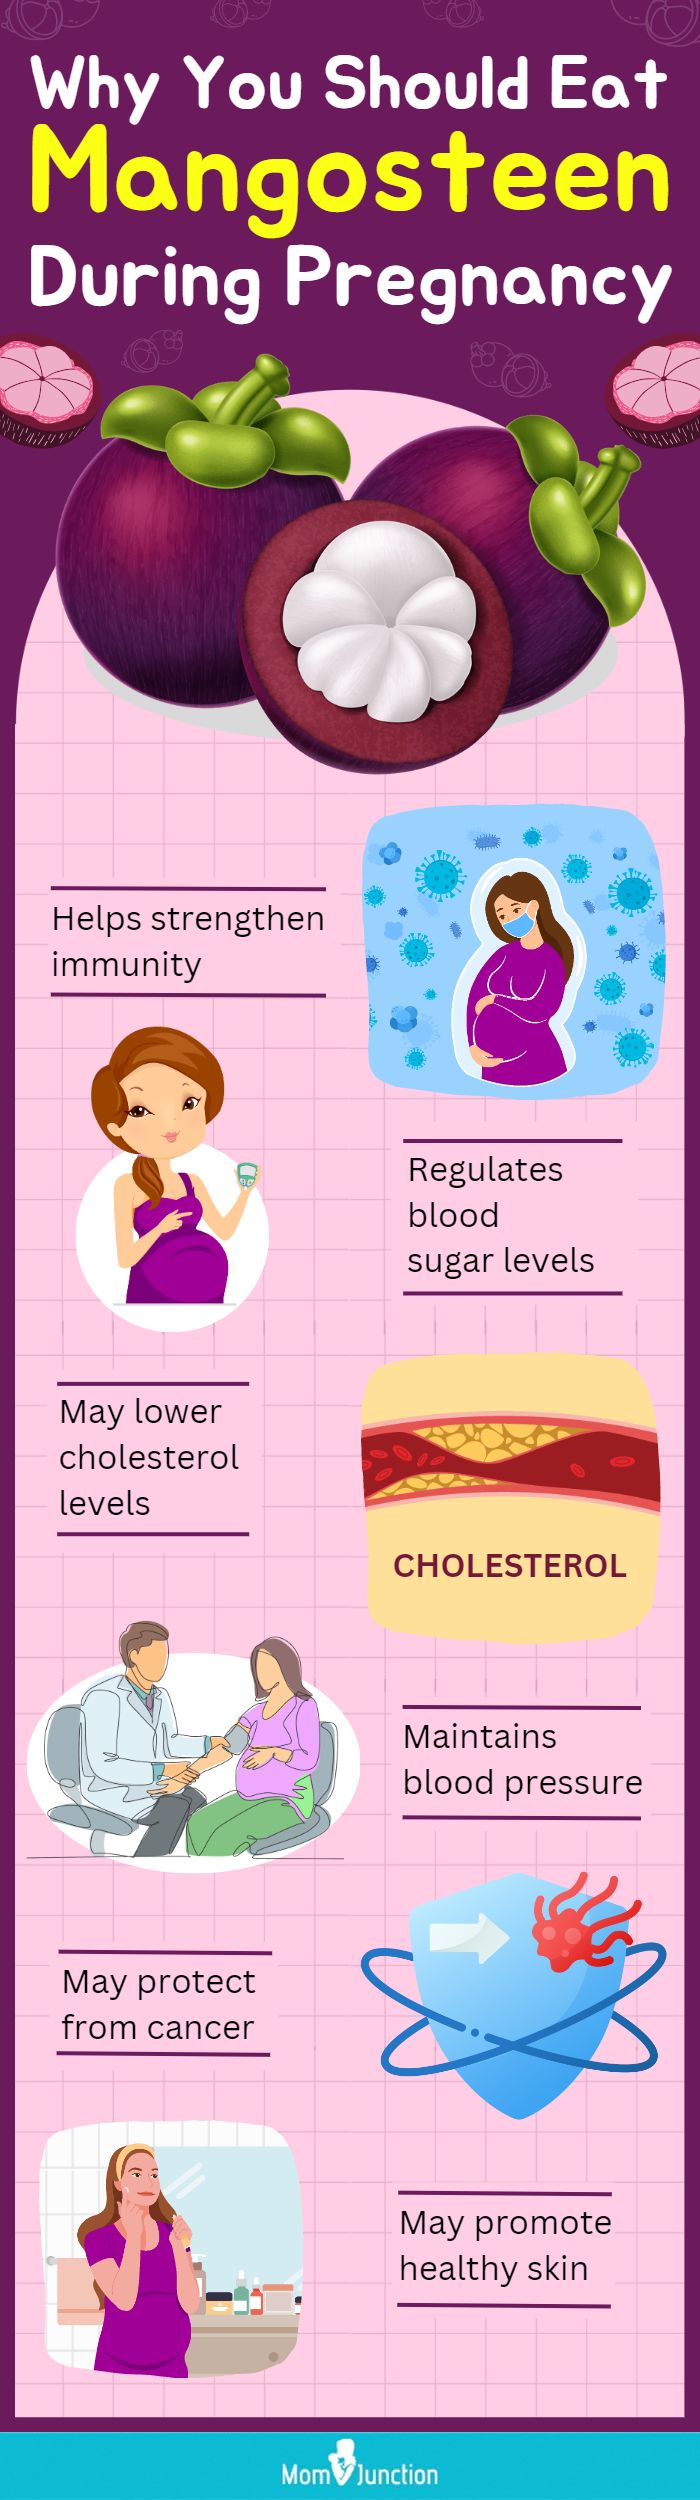 why you should eat mangosteen during pregnancy (infographic)